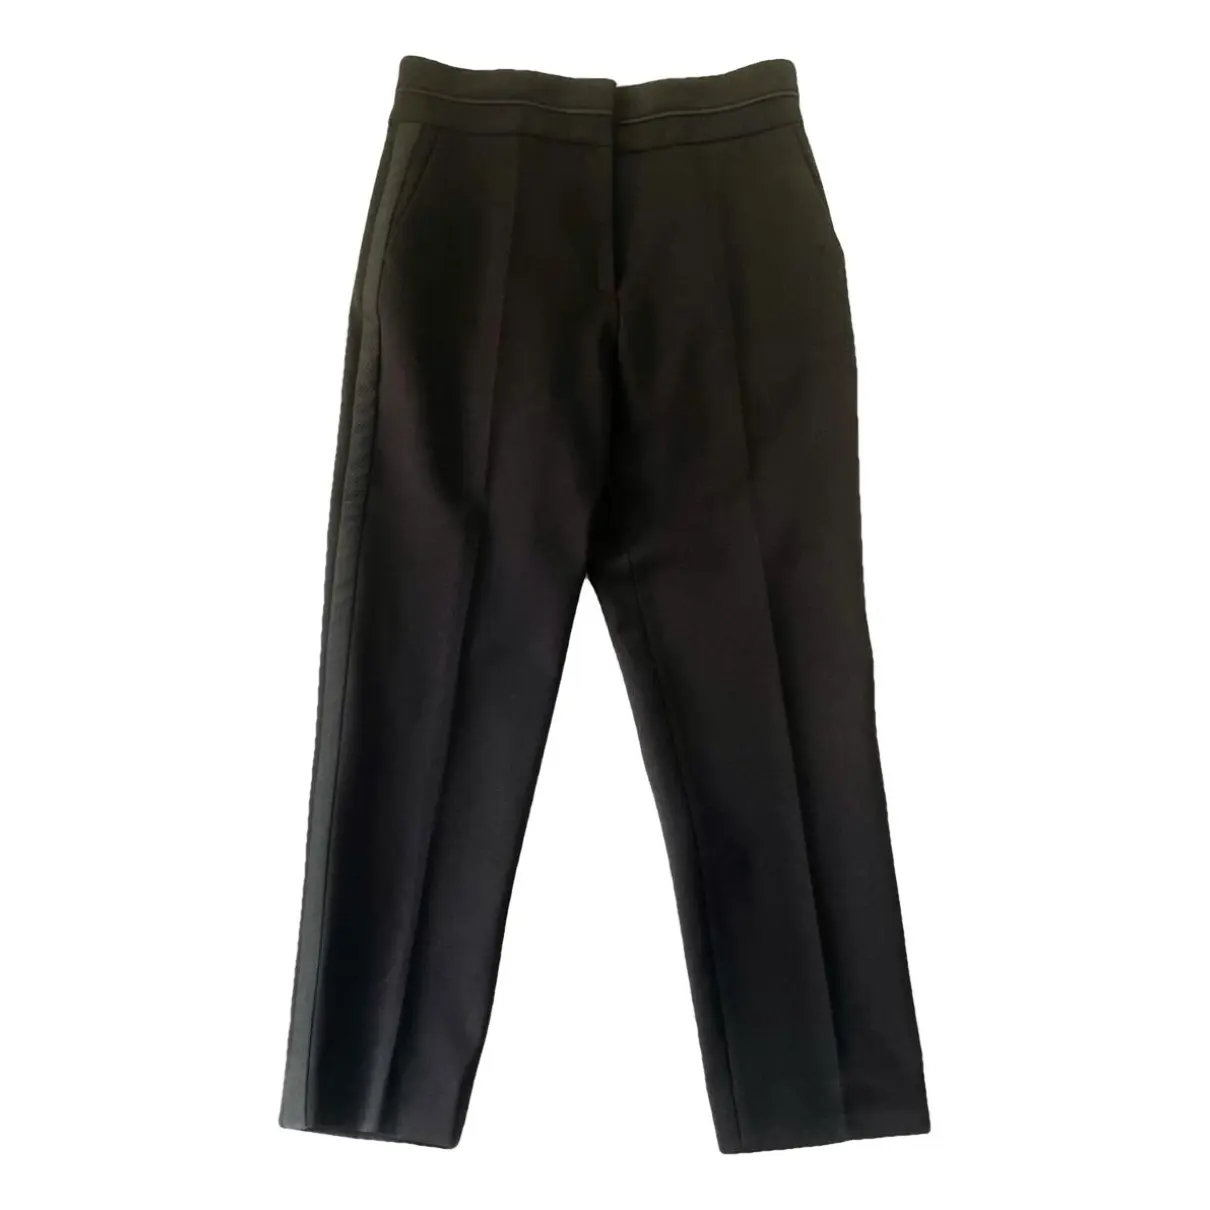 Fall Winter 2020 trousers